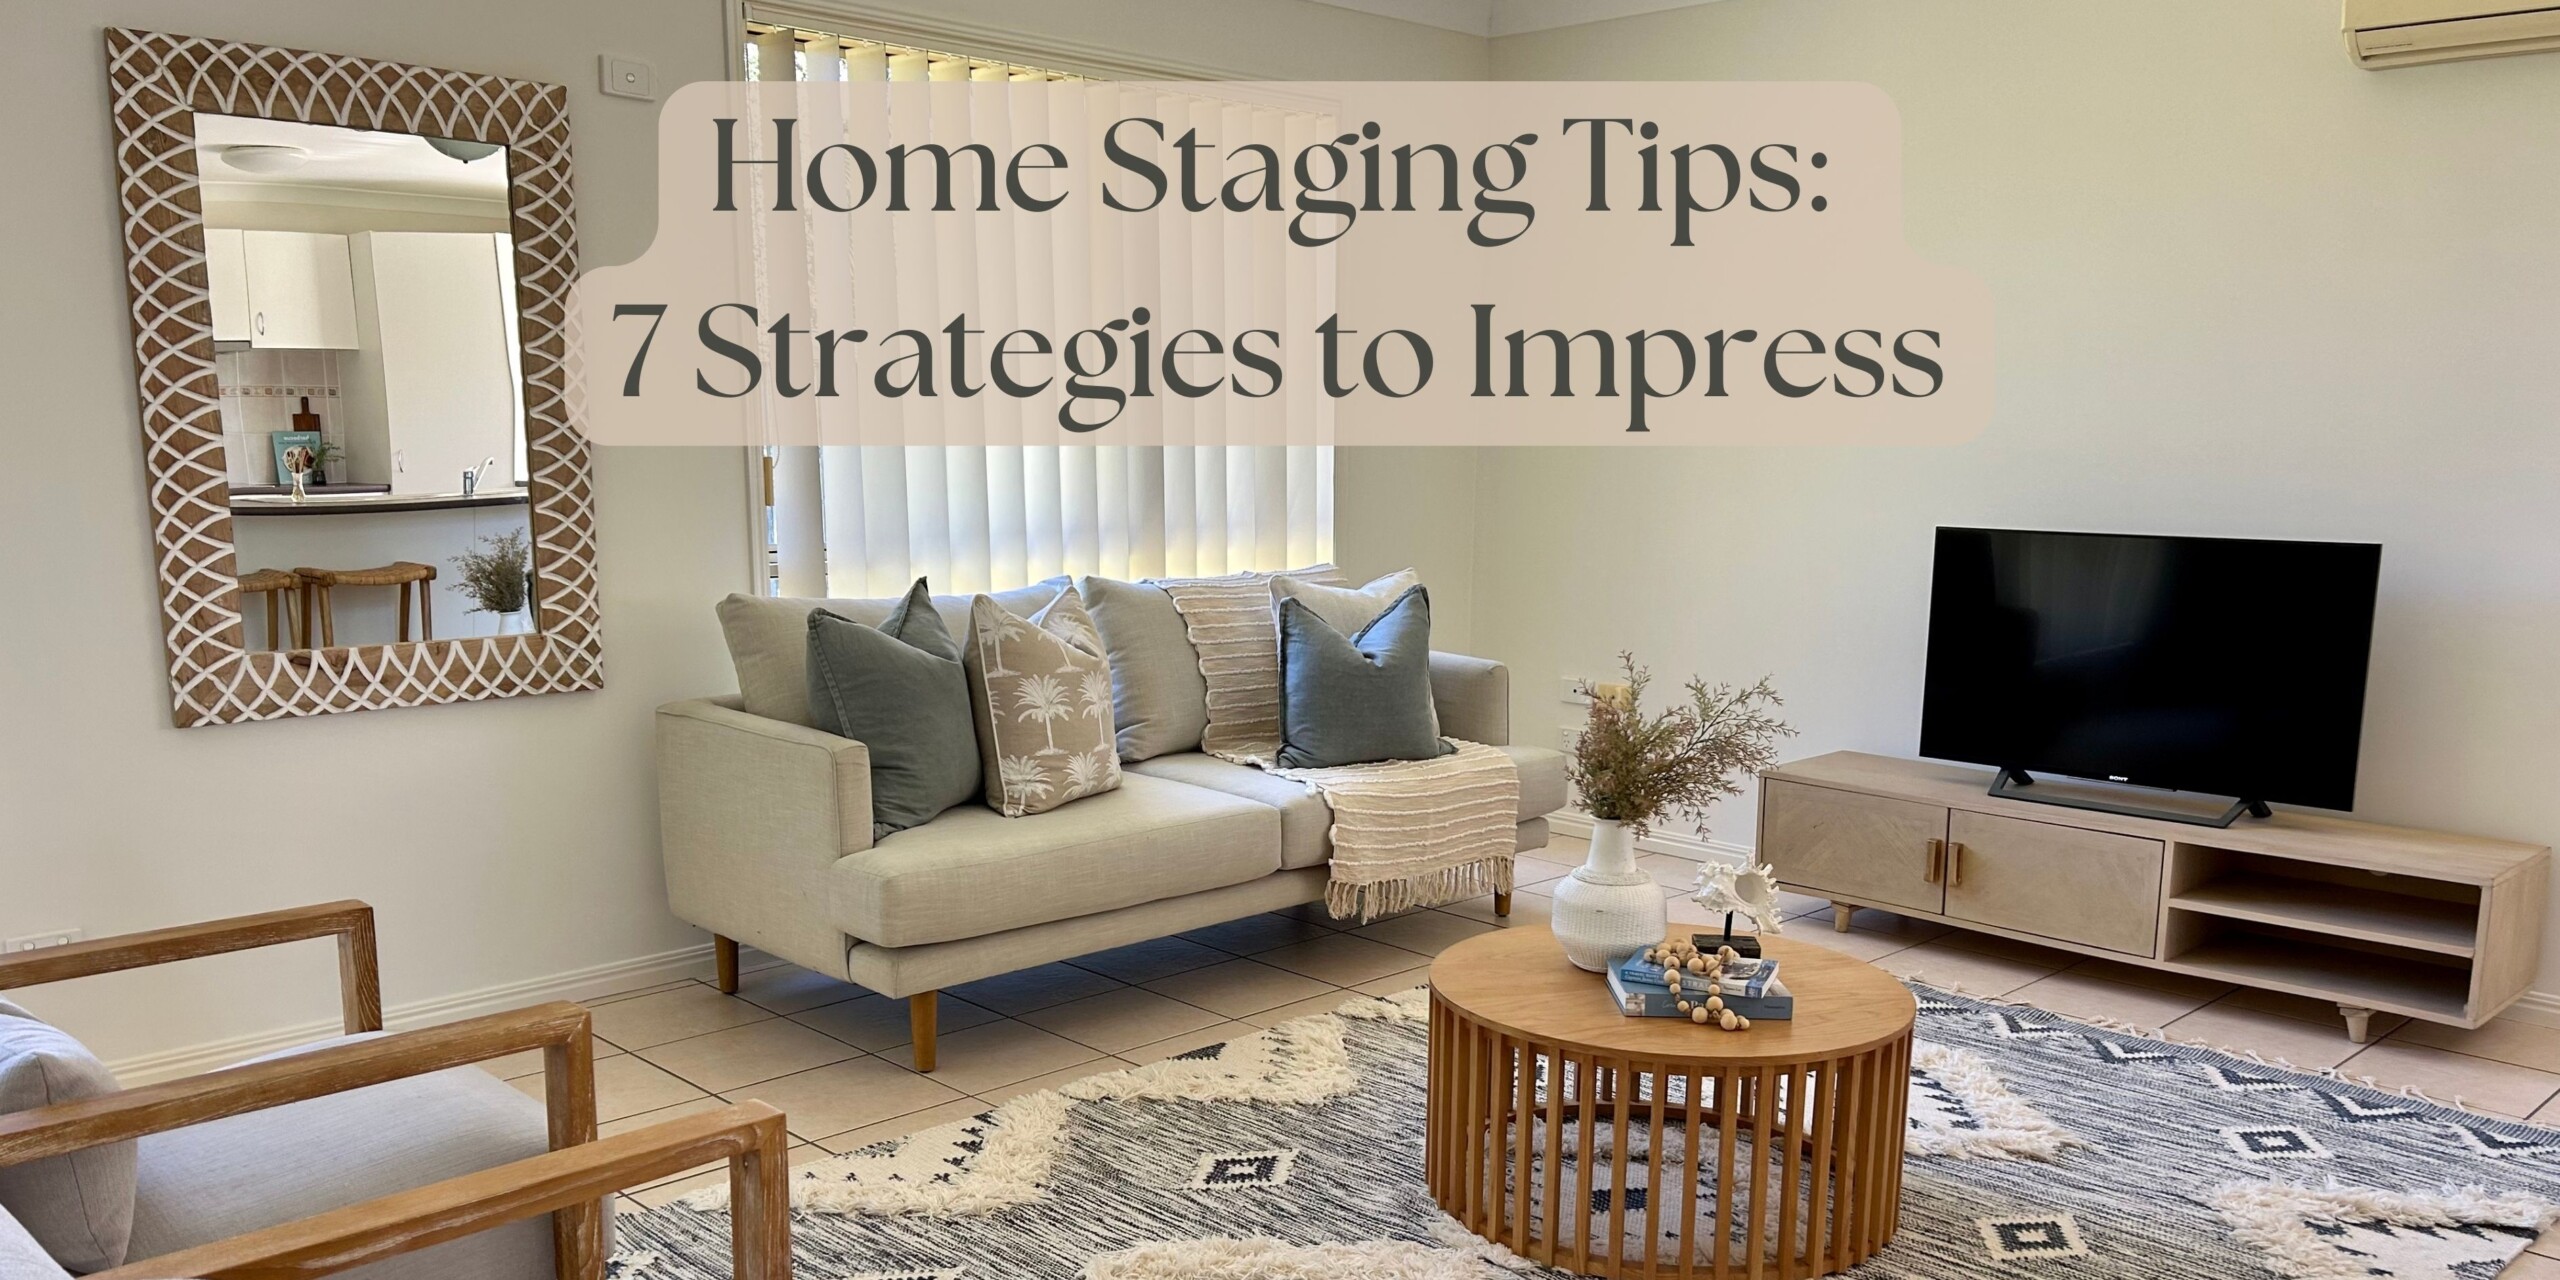 Home Staging Tips: 7 Strategies to Impress